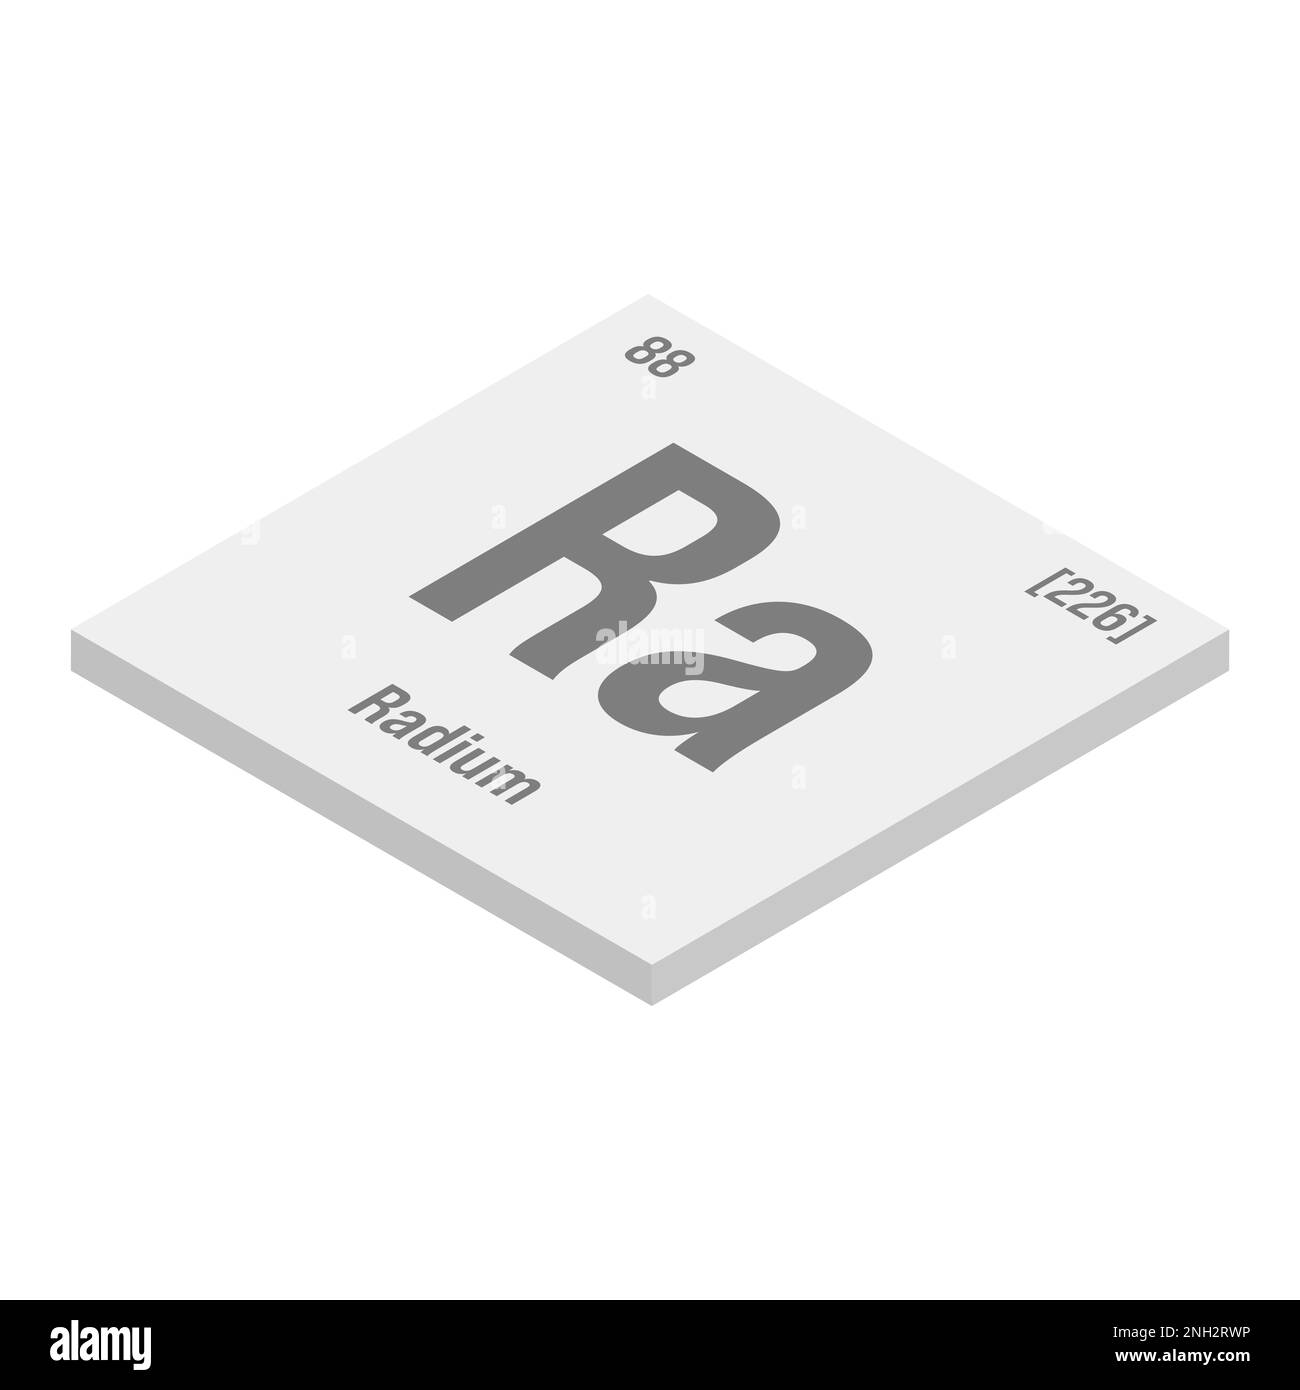 Radium, Ra, gray 3D isometric illustration of periodic table element with name, symbol, atomic number and weight. Alkaline earth metal with radioactive properties, formerly used in medical therapy and as a component of certain types of paint. Stock Vector